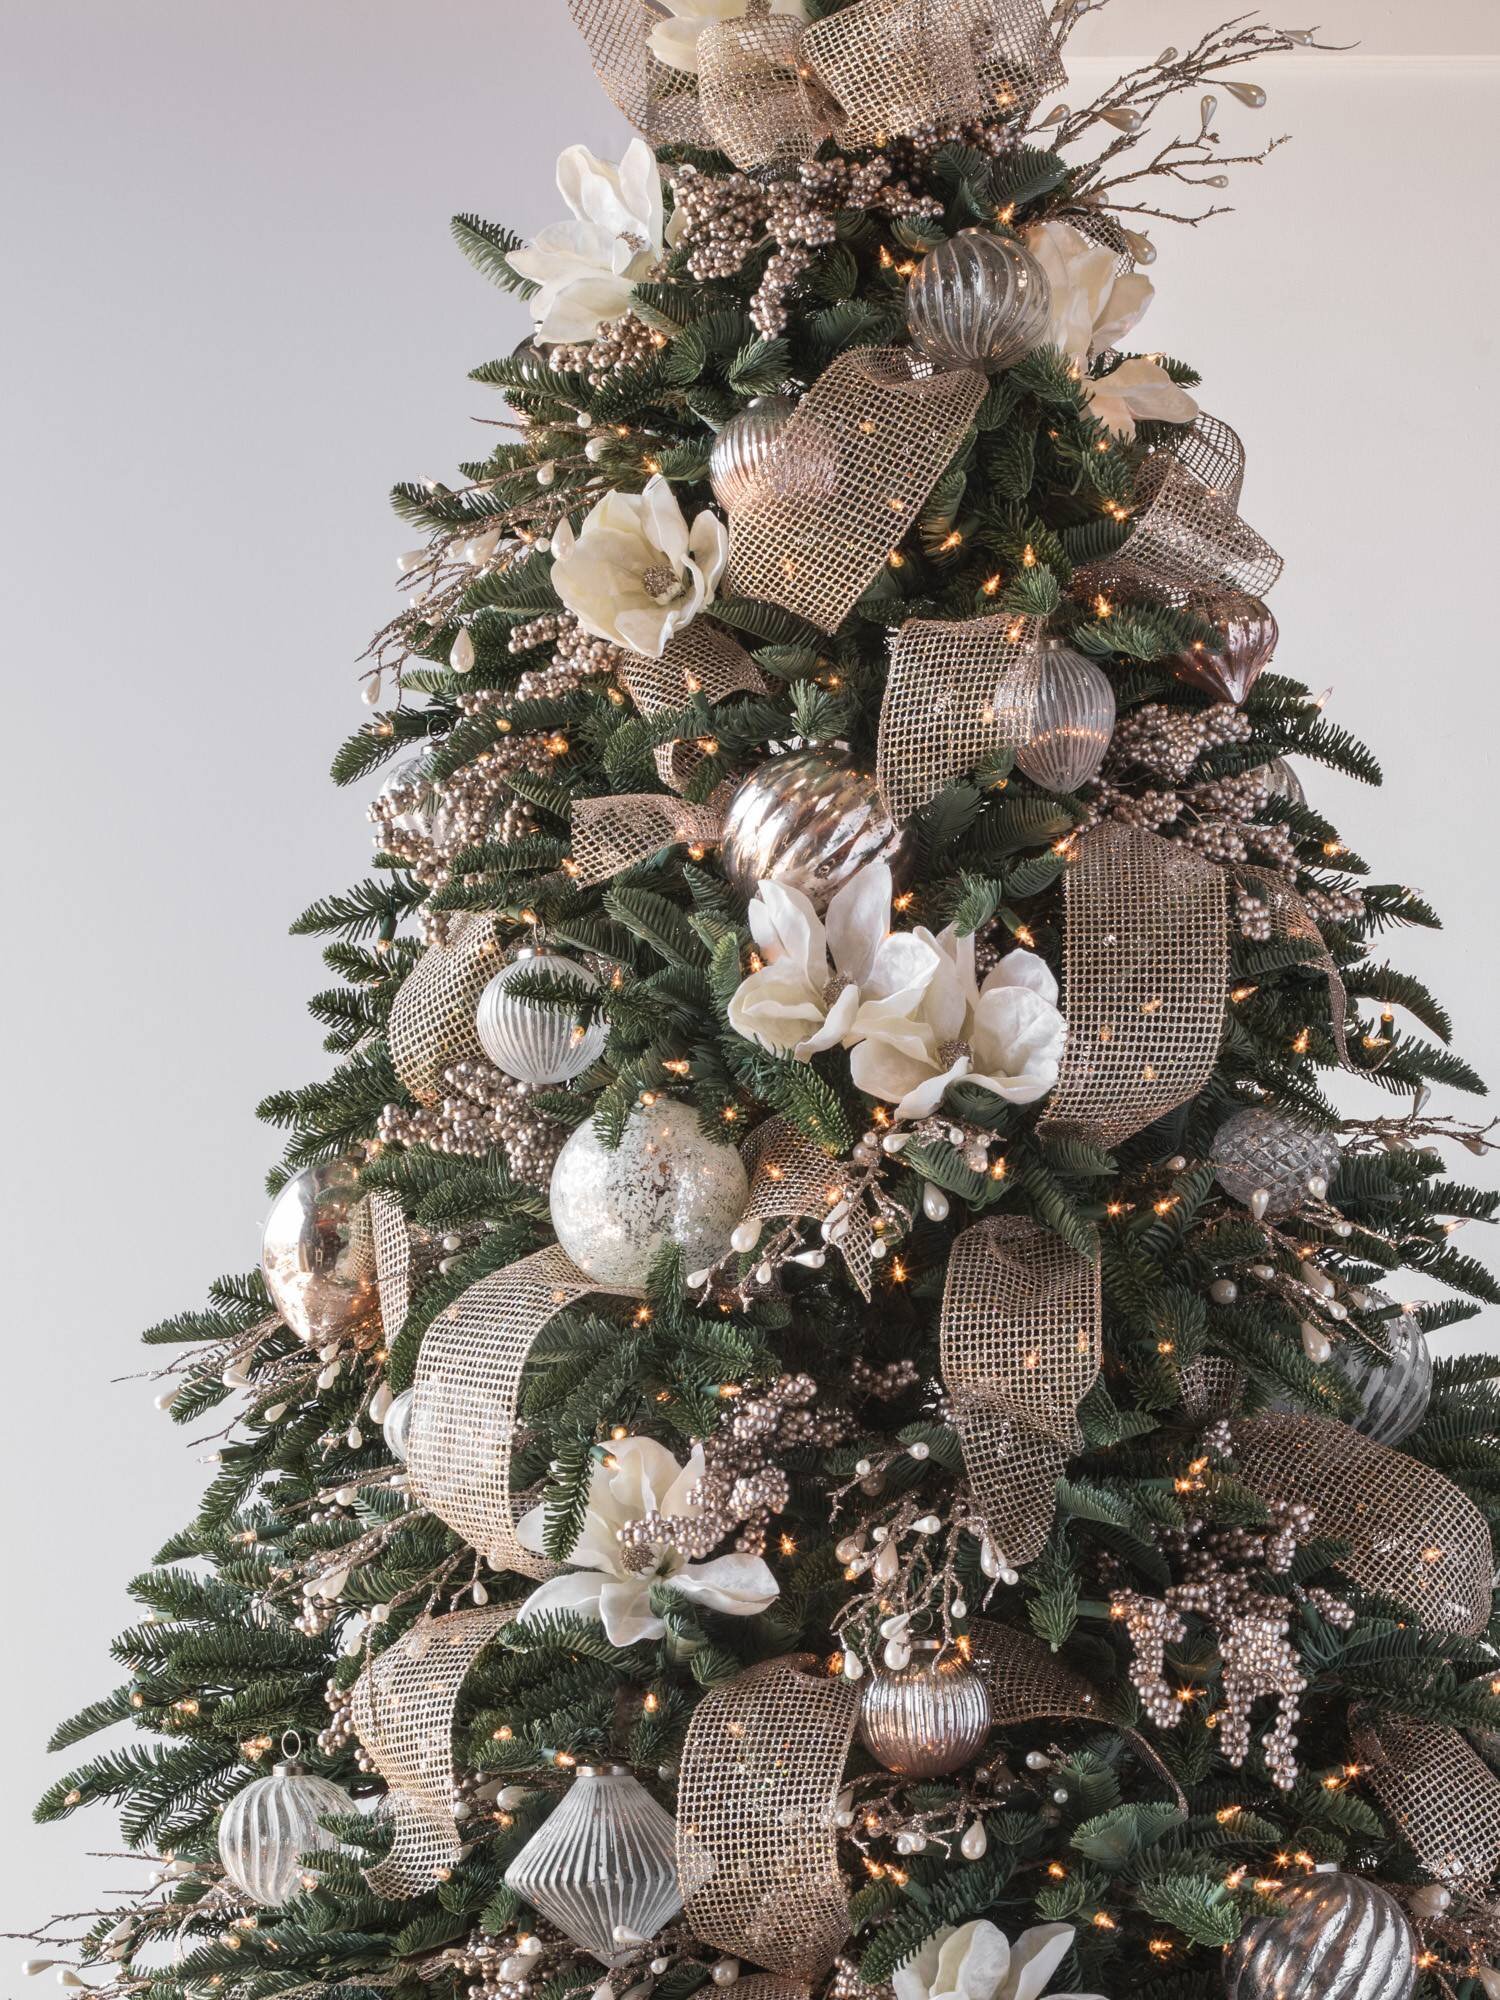 10 must follow tips for decorating gorgeous Christmas Trees